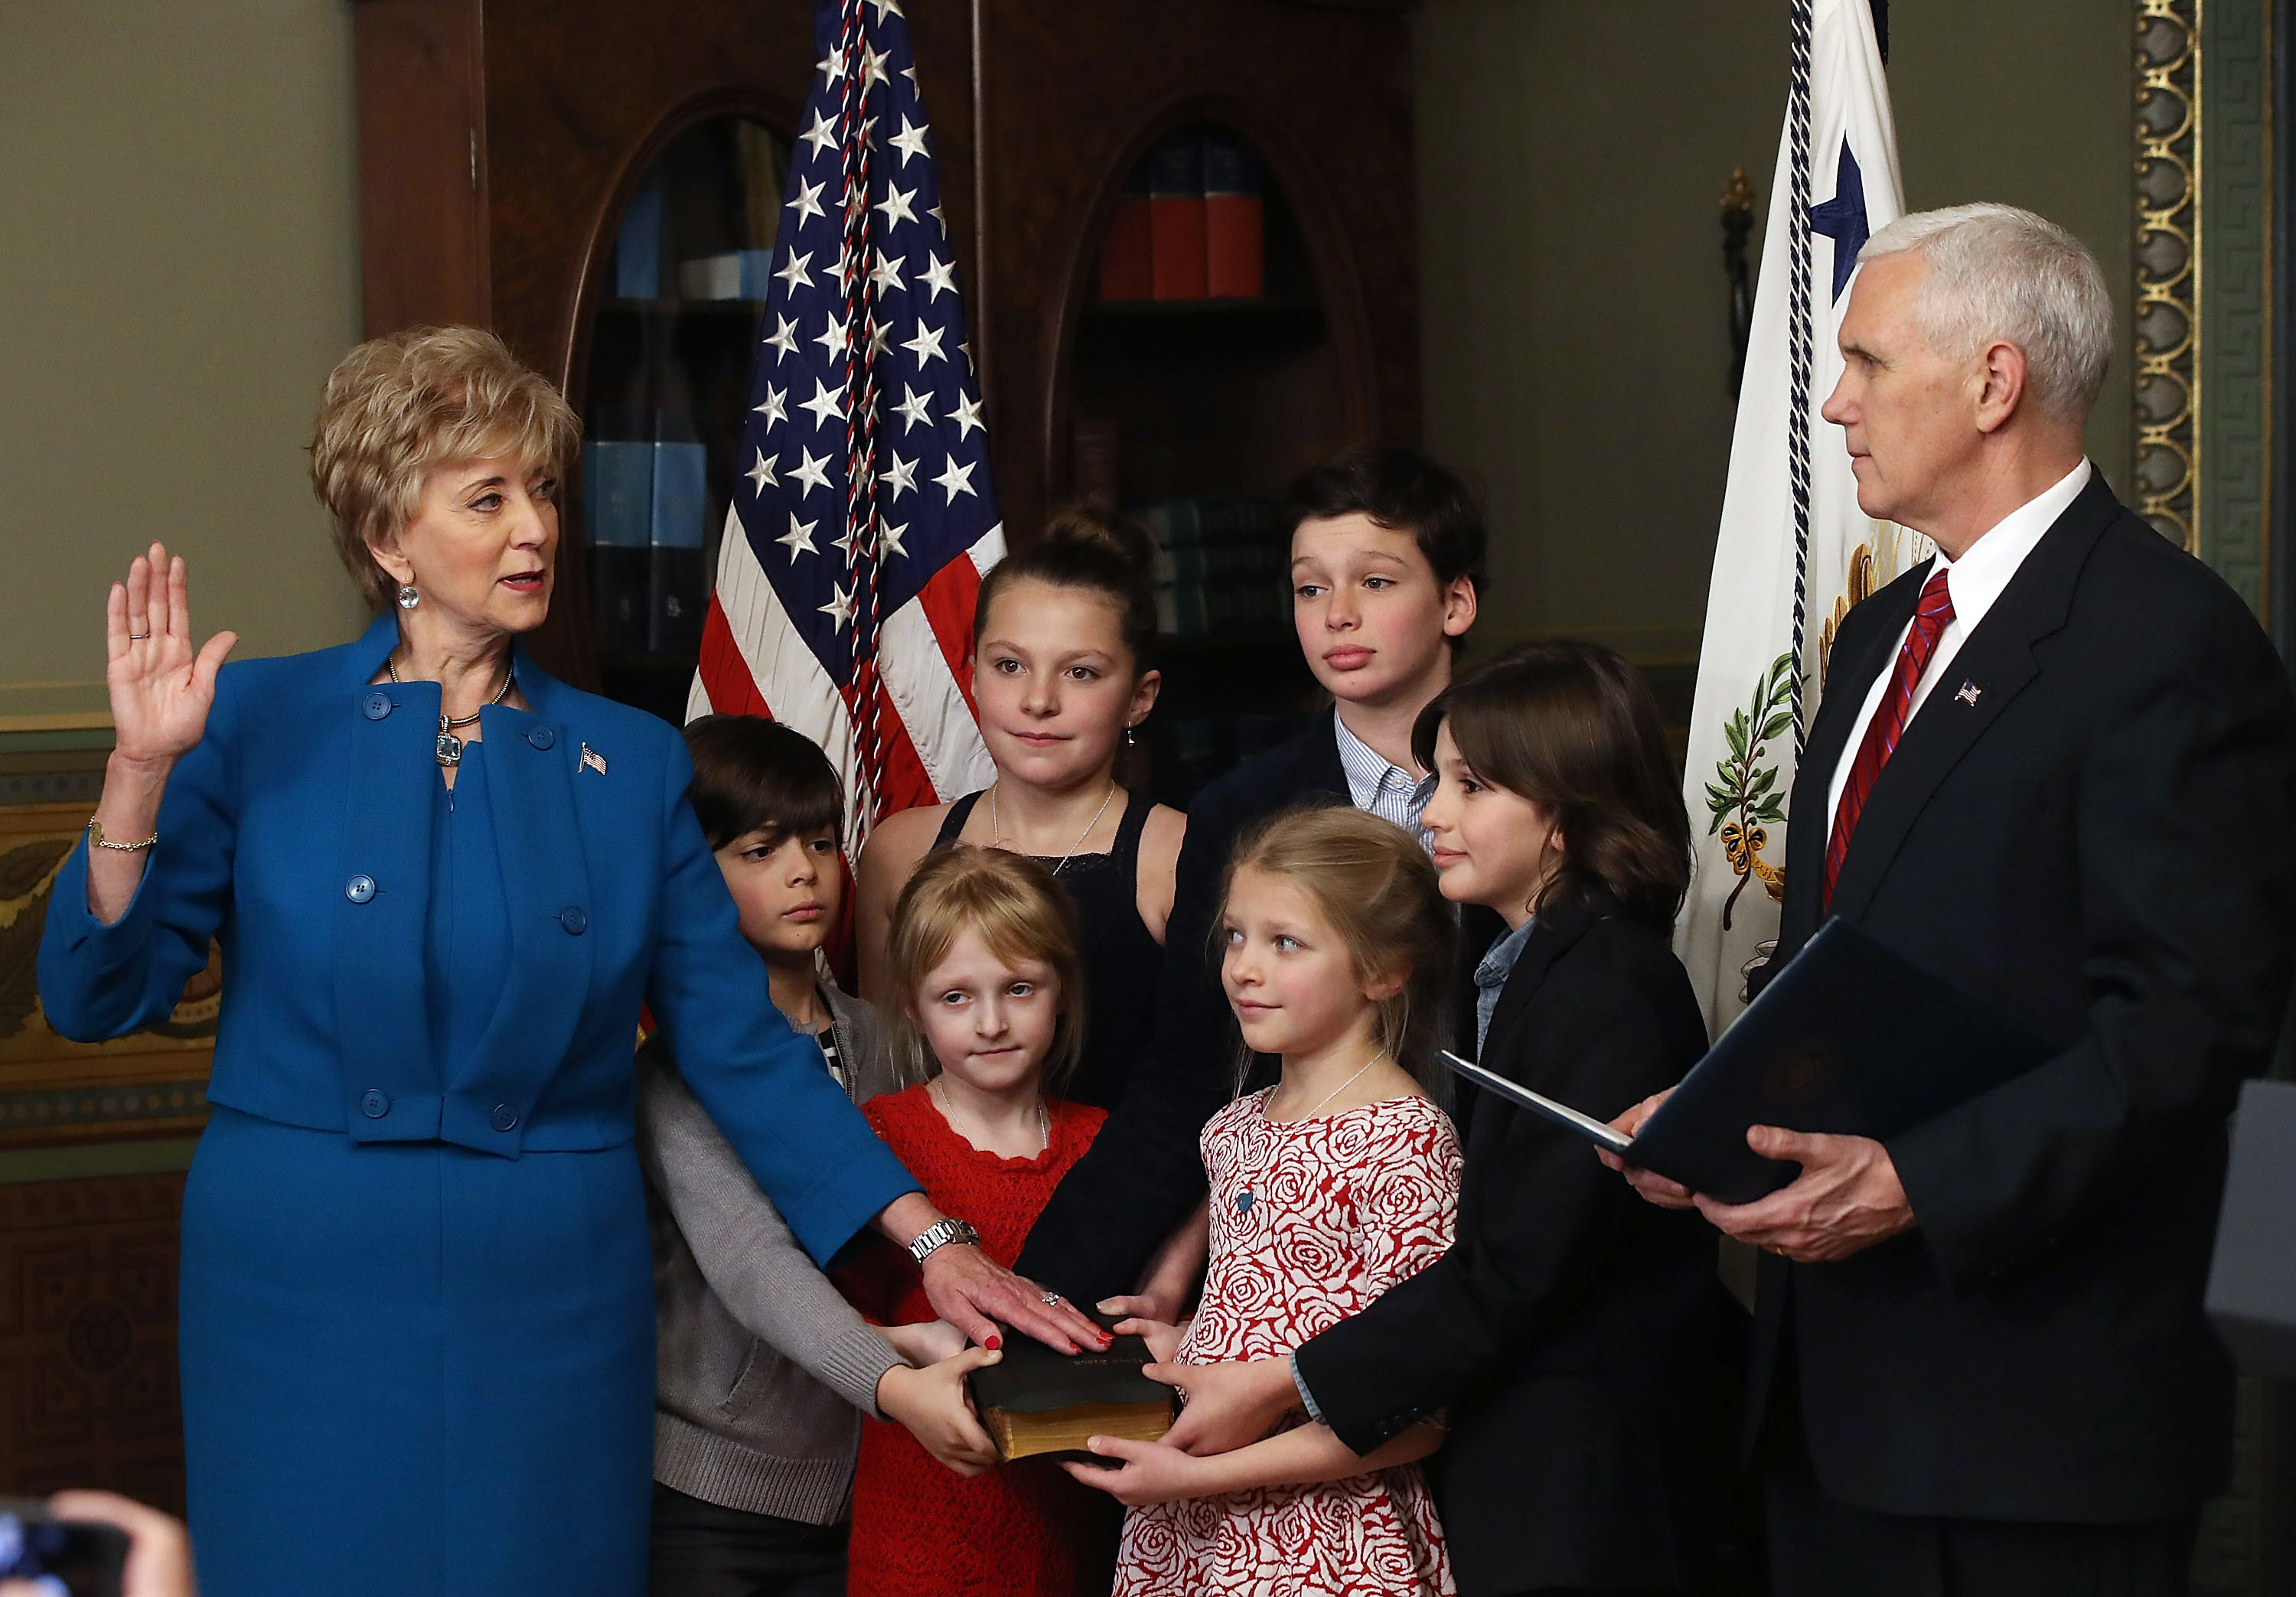 Former wrestling entertainment executive Linda McMahon is surrounded by her grandchildren as VP Mike Pence swears her in as head of the Small Business Administration. (Mark Wilson/Getty Images)